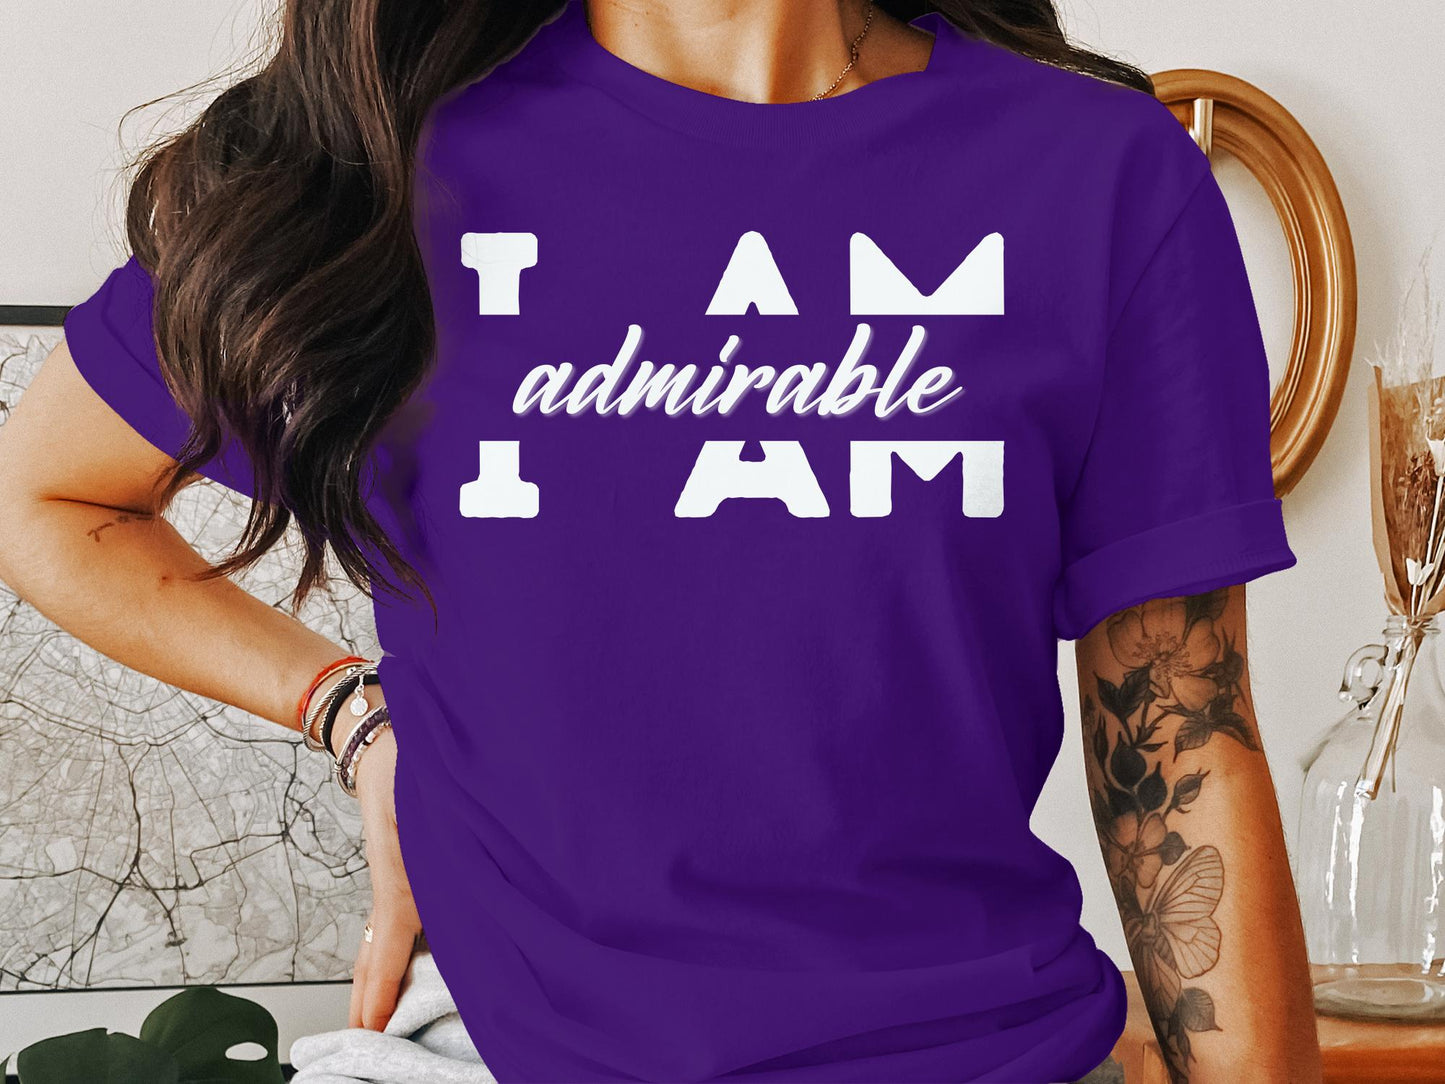 I Am Admirable - Affirmation Quote Shirt - Encouraging Self Care